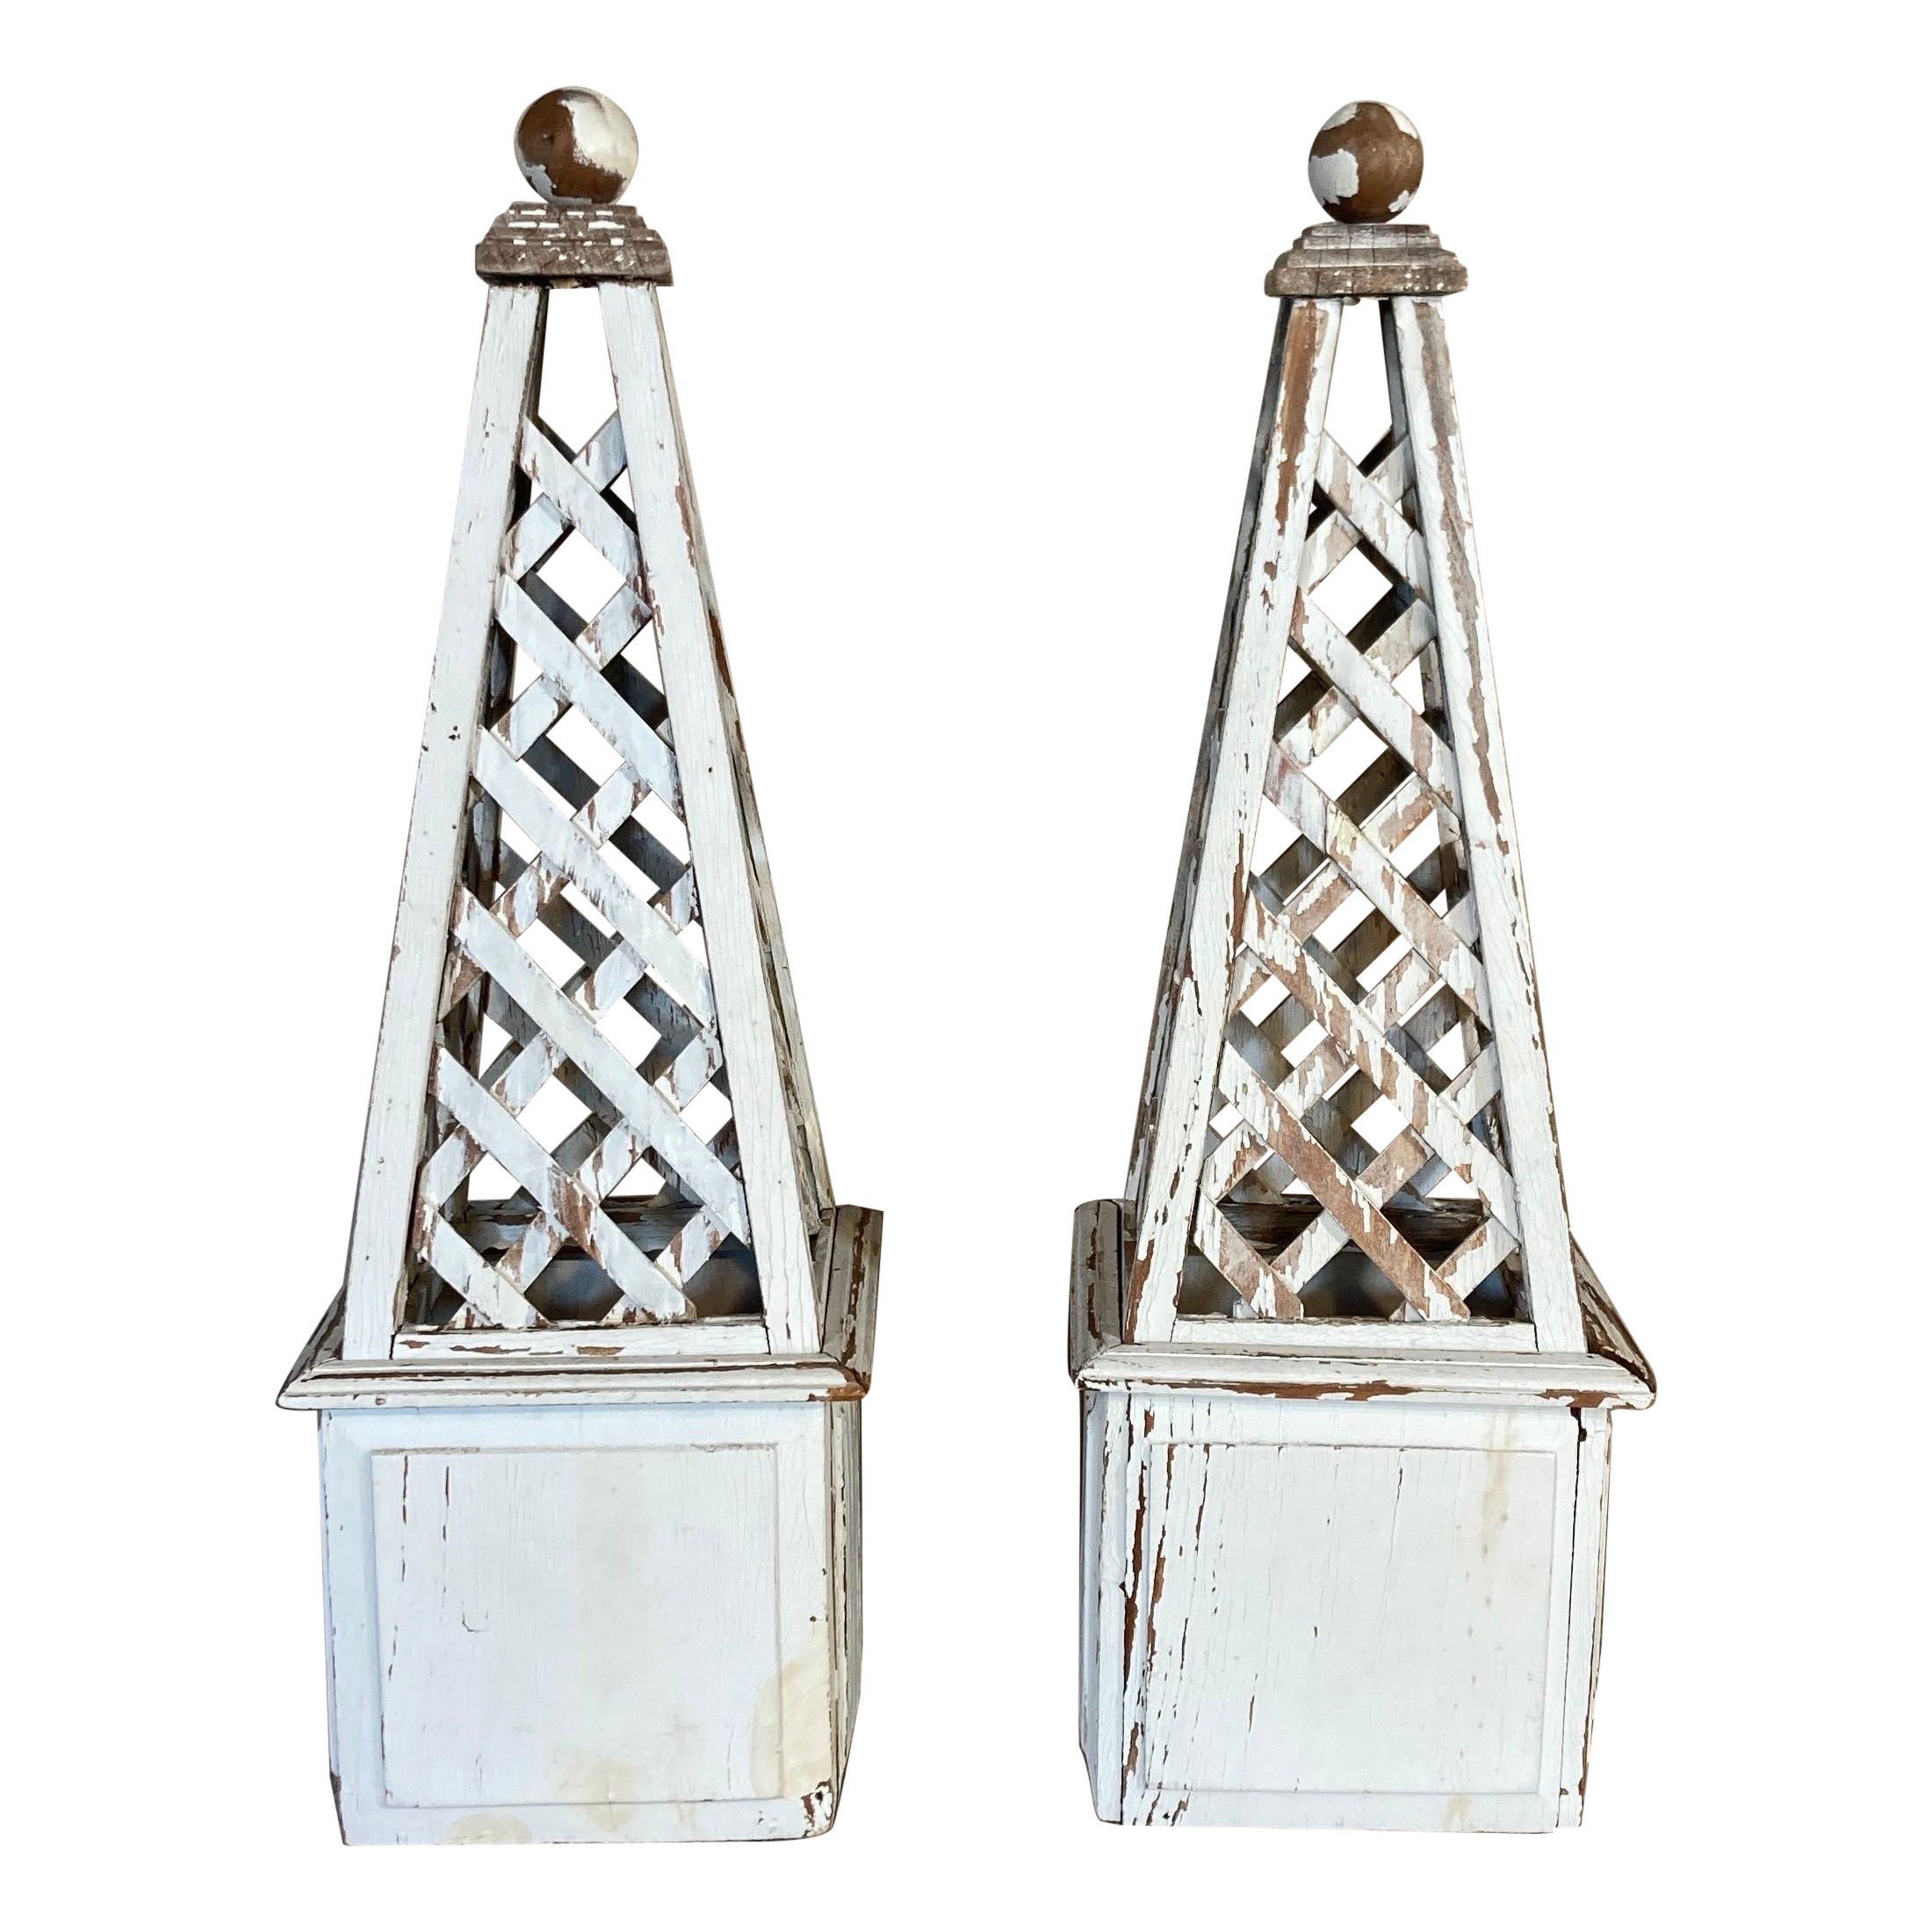 Pair of Small Folk Art Painted Wood Tabletop Obelisks, American, circa 1940s For Sale